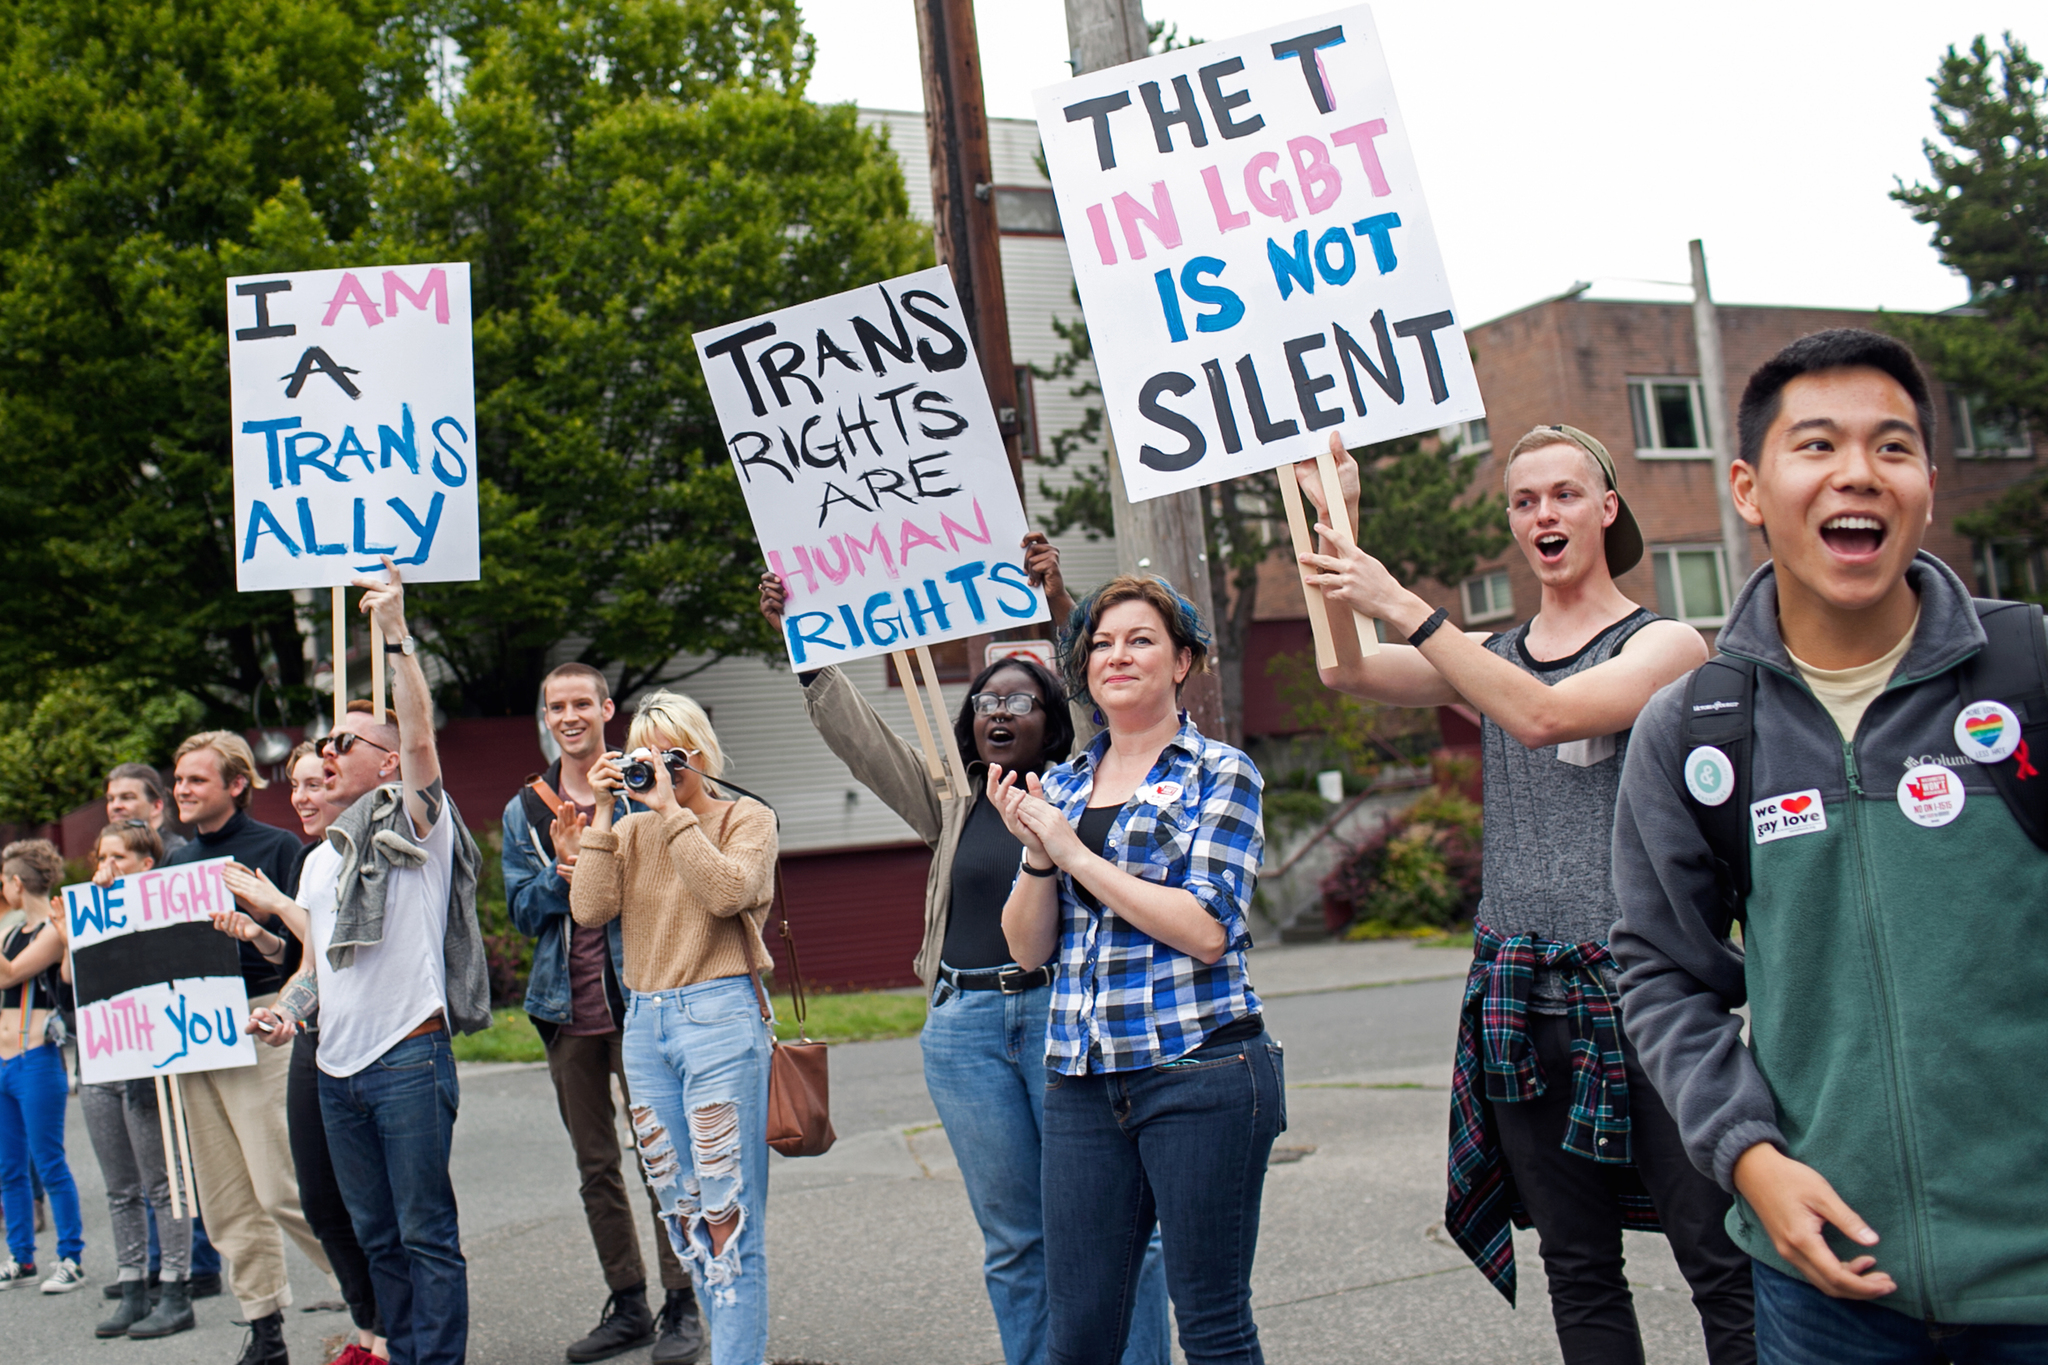 Photos: Seattleites March for Trans Pride